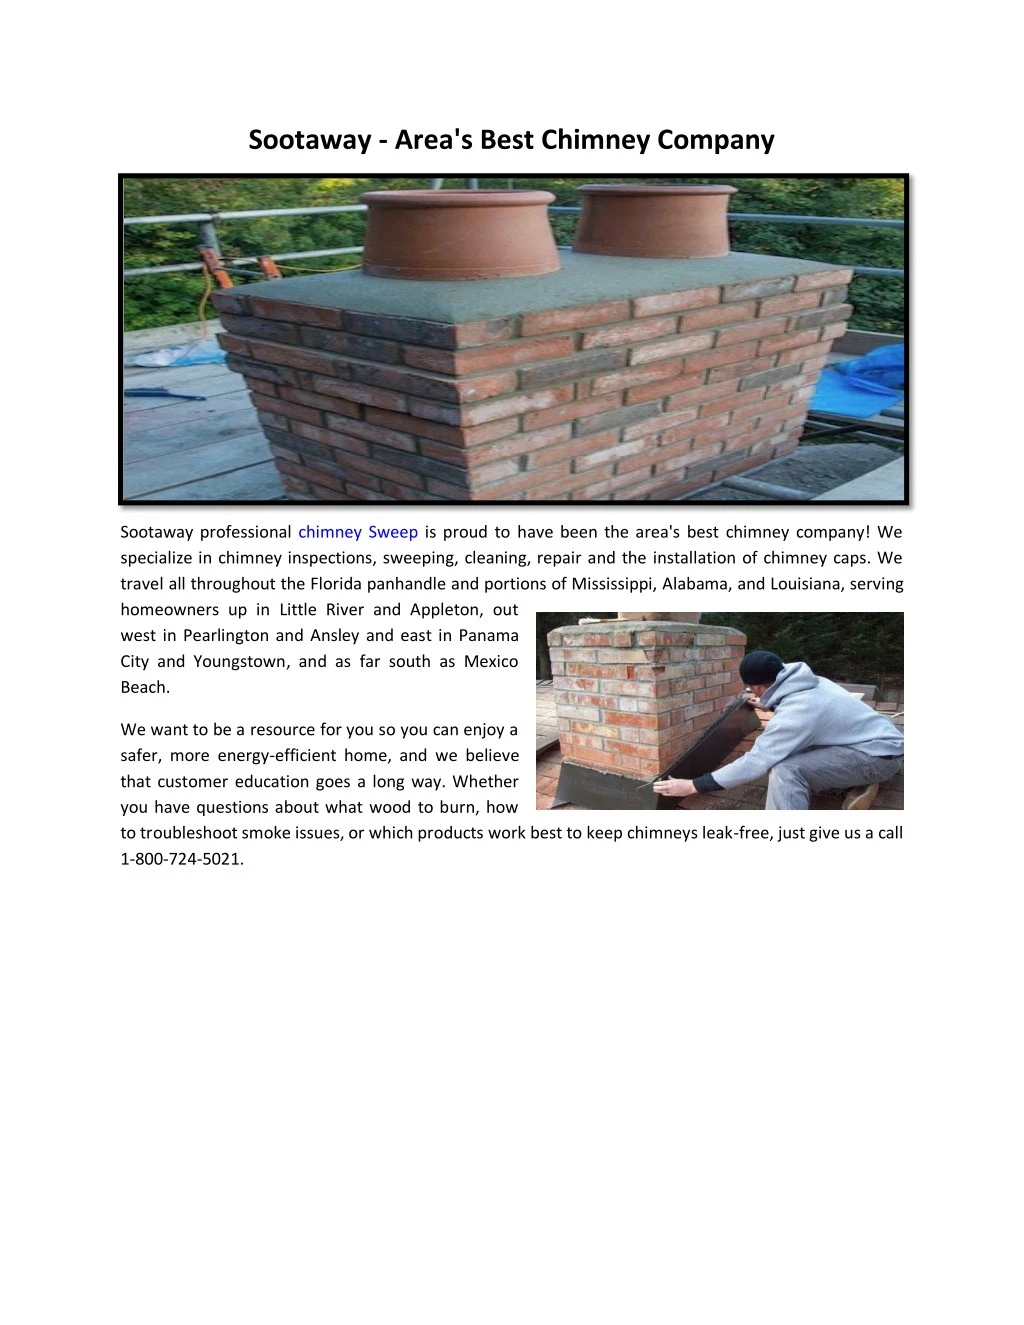 sootaway area s best chimney company